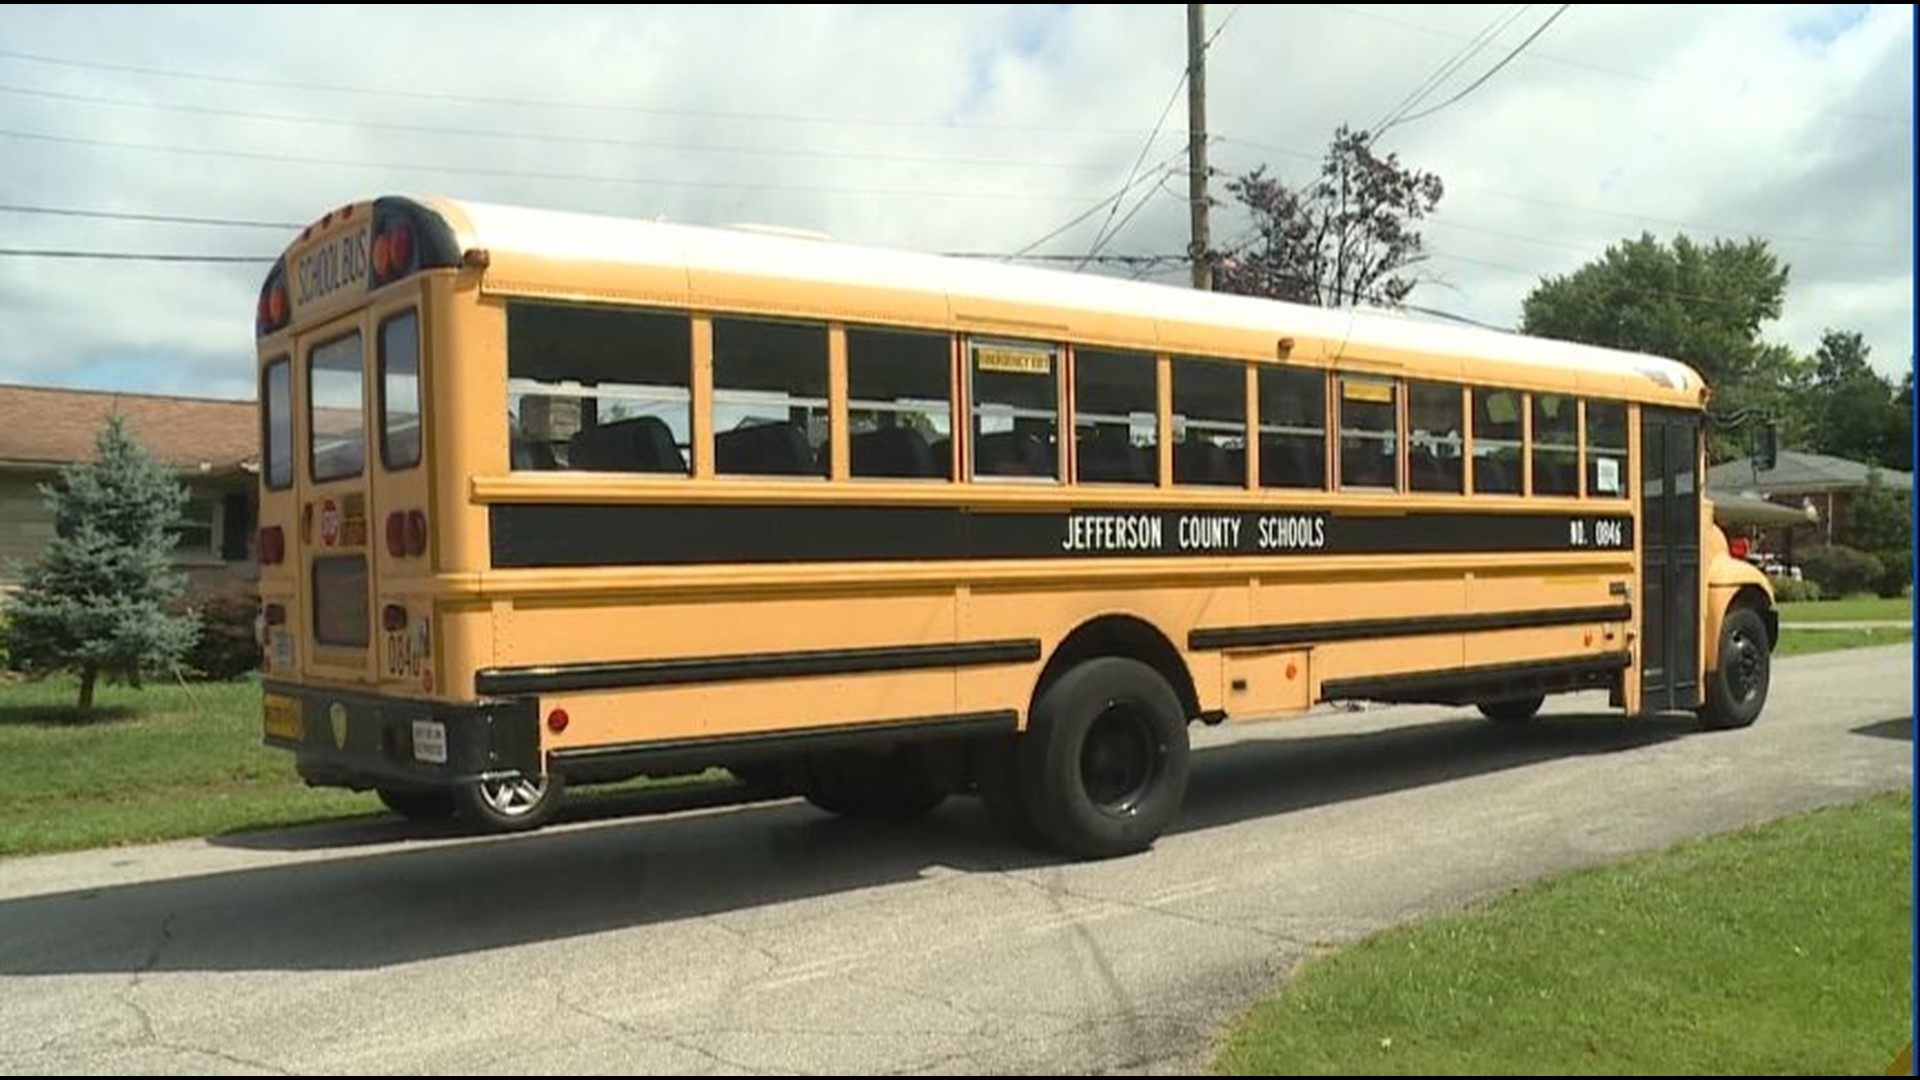 JCPS bus fiasco Shortterm actions implemented to address delays